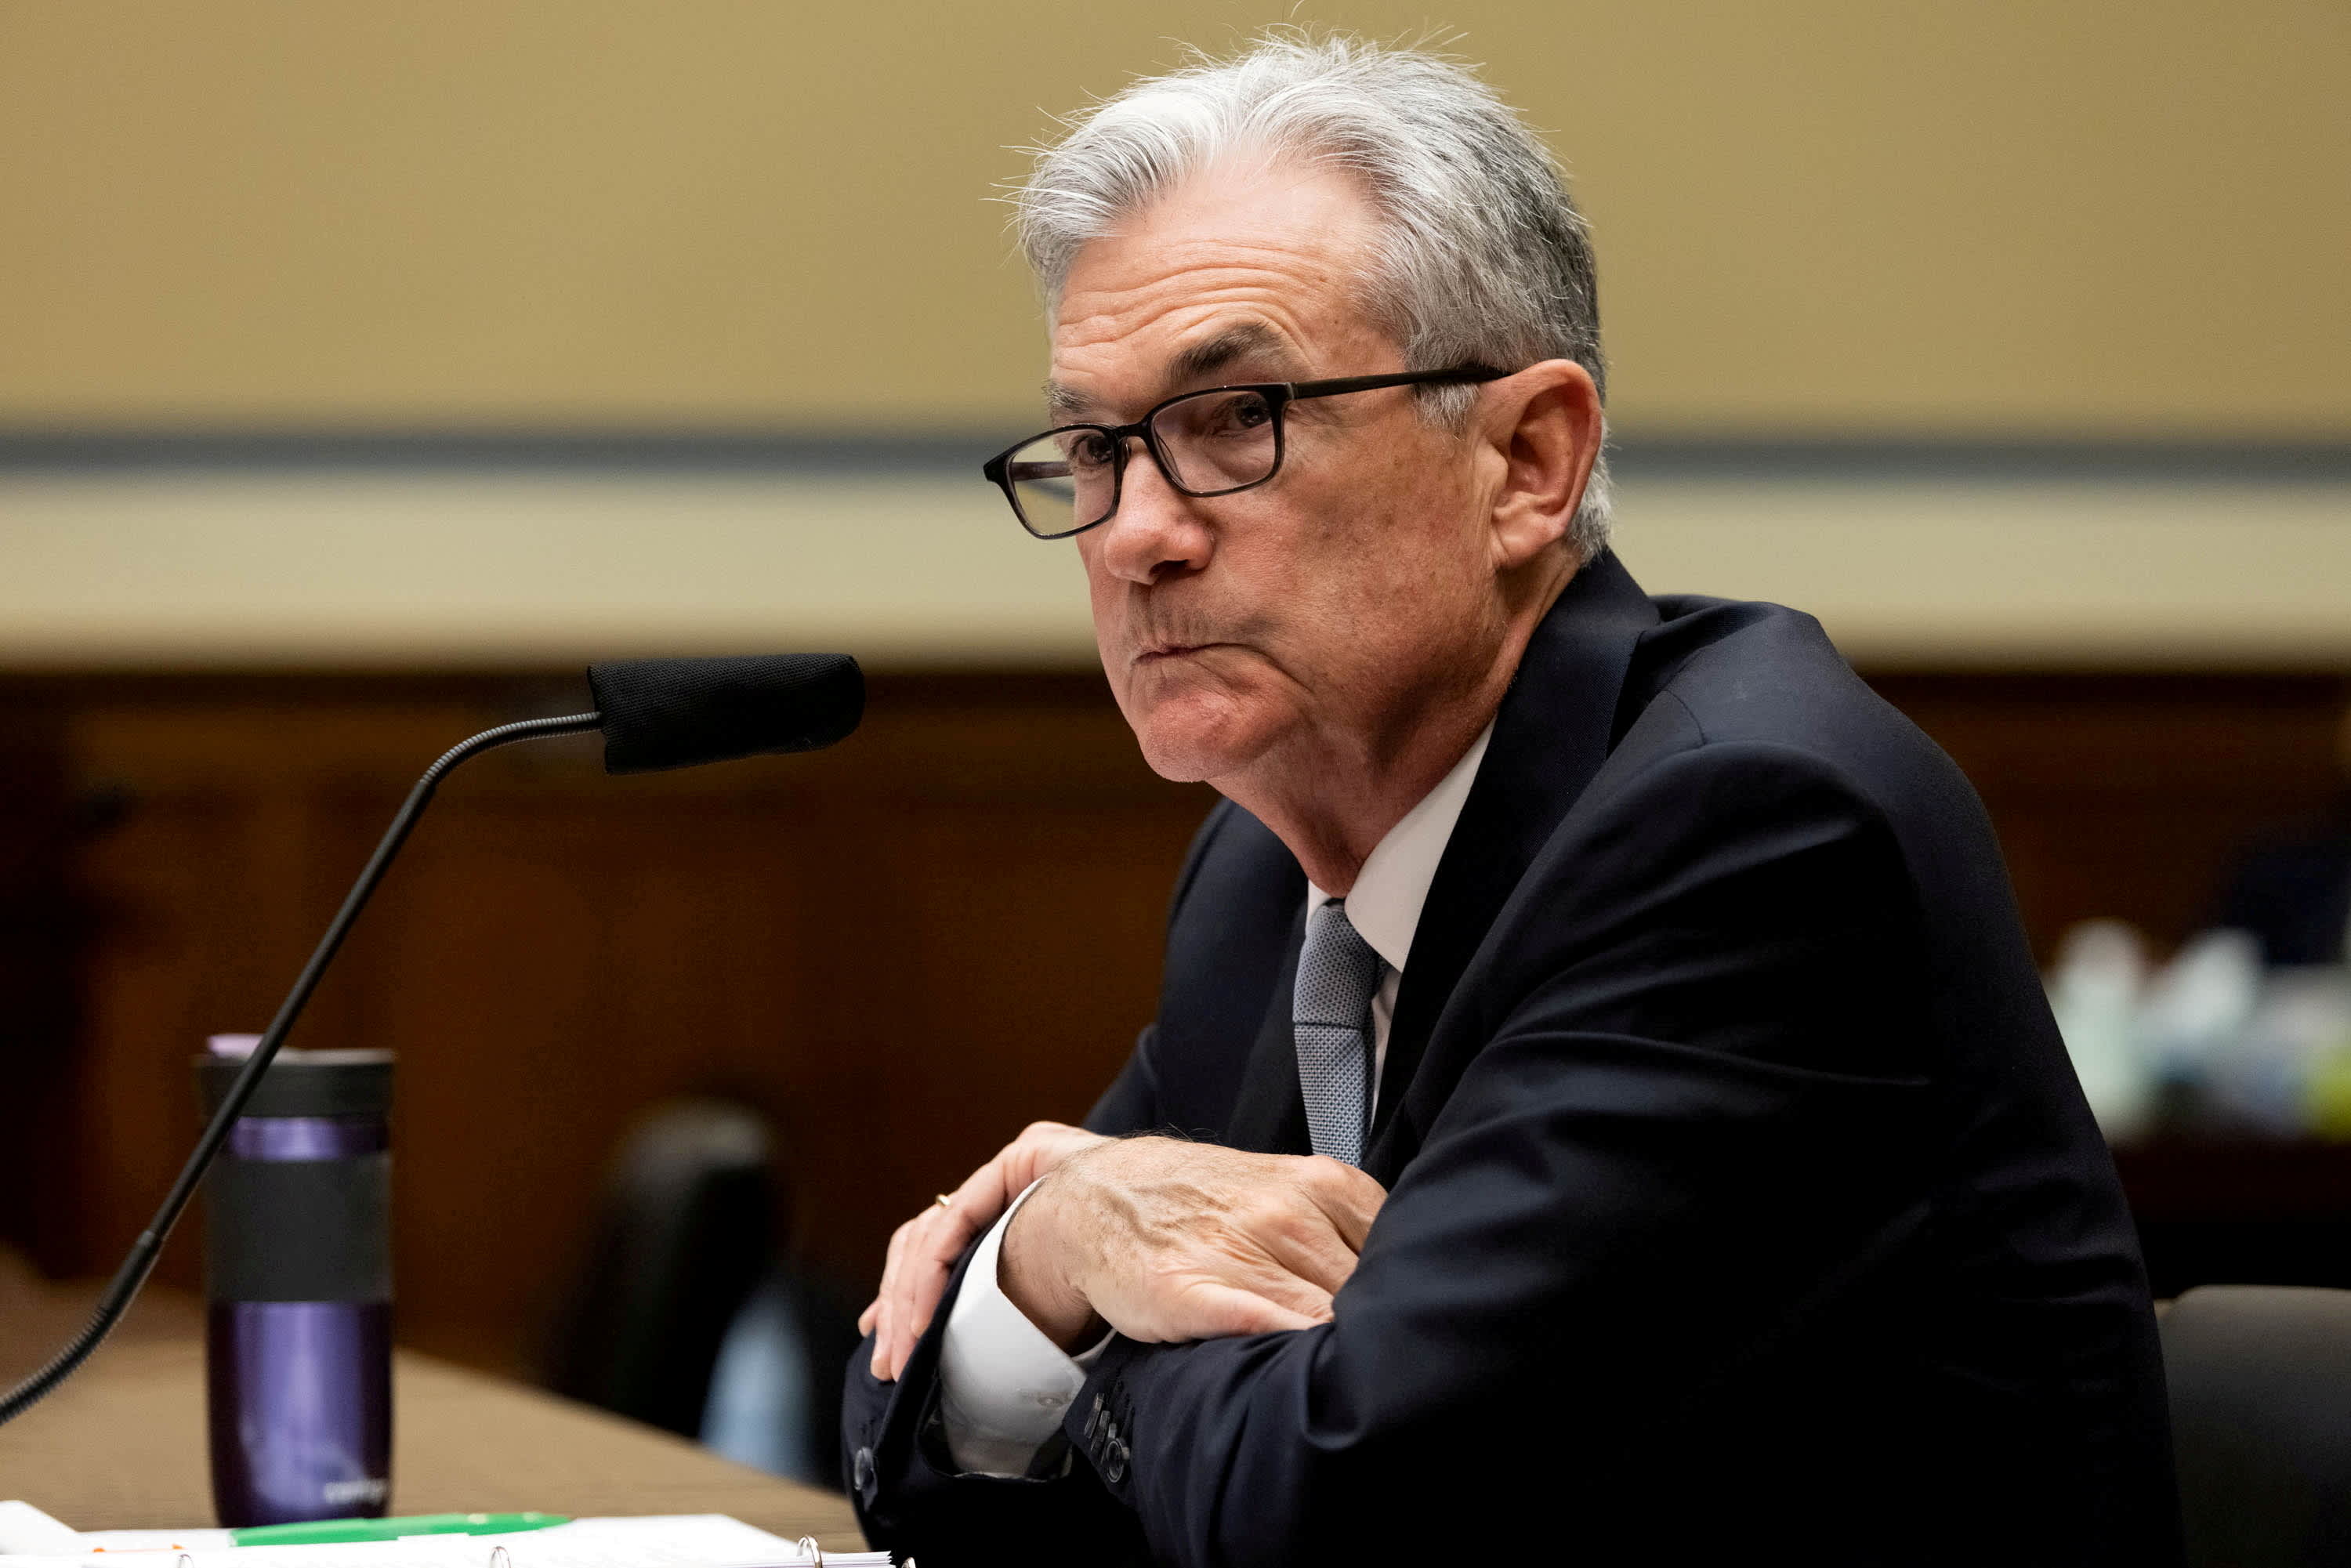 Watch Fed Chair Powell speak live to Senate banking panel on the economy and policy